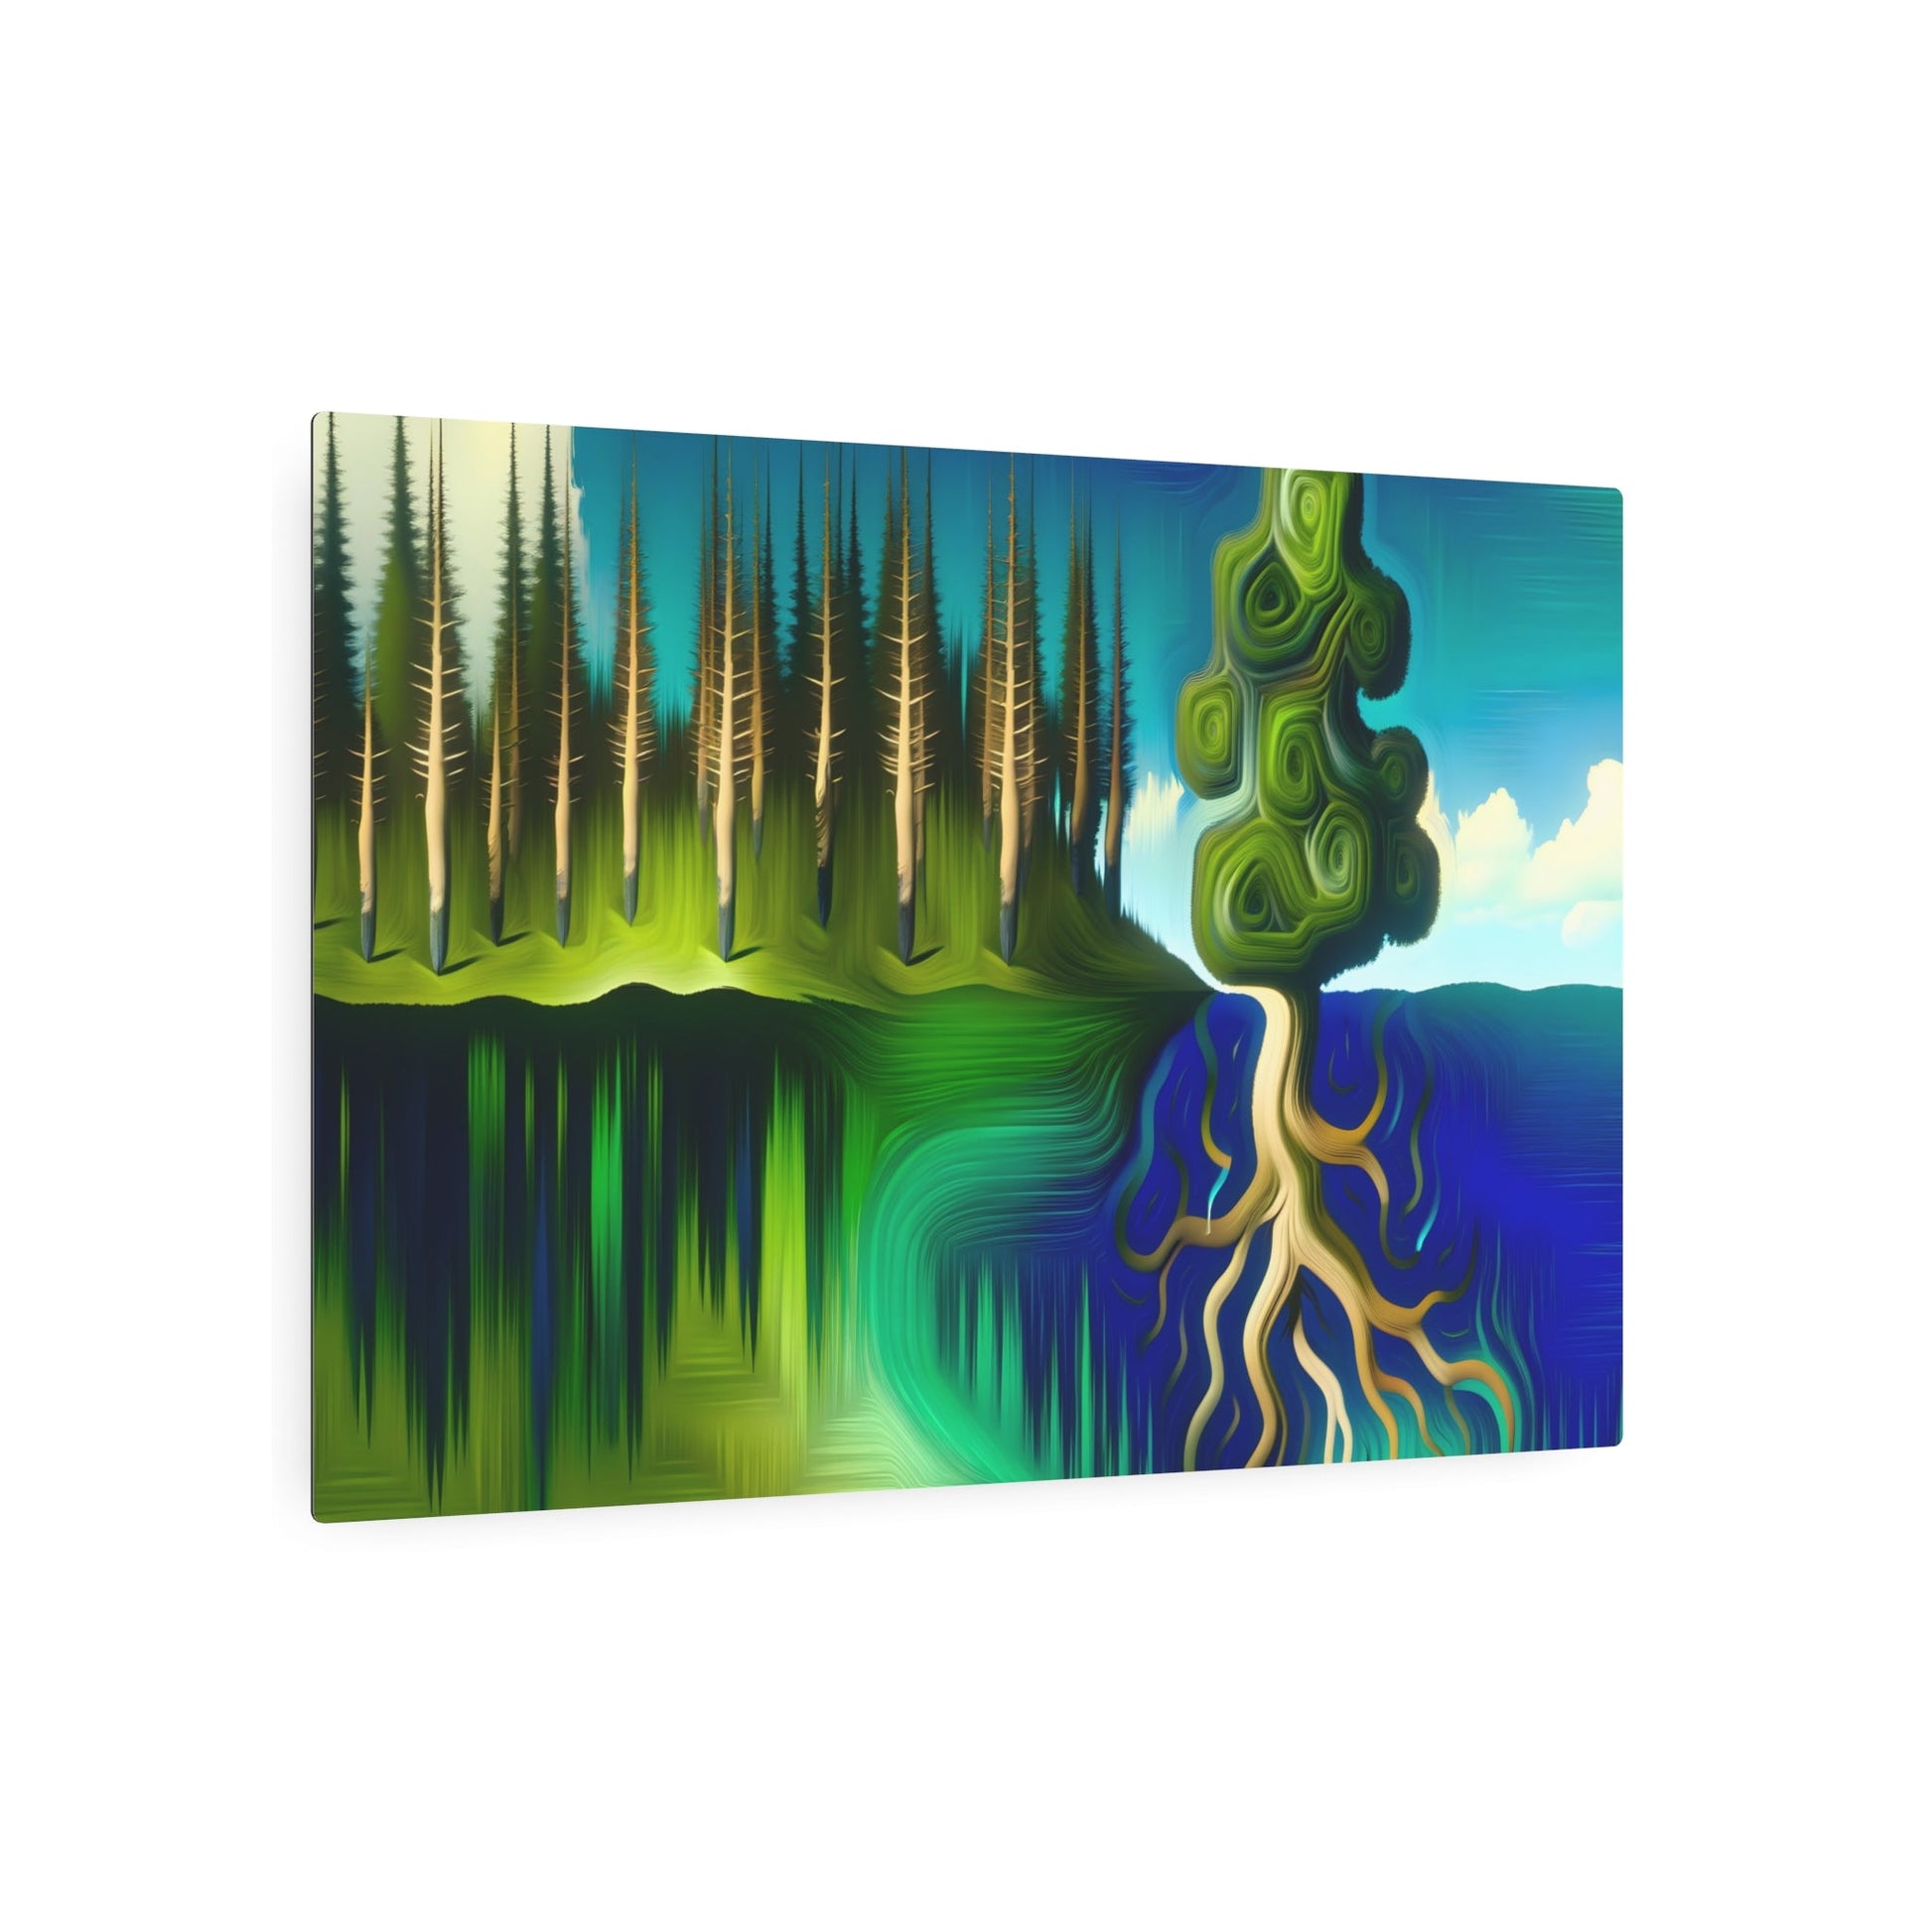 Metal Poster Art | "Modern Surrealism Art: Dream-Like Fusion of Skybound Trees & Underwater Forests - Contemporary Whimsical Wall Decor in Surreal - Metal Poster Art 36″ x 24″ (Horizontal) 0.12''